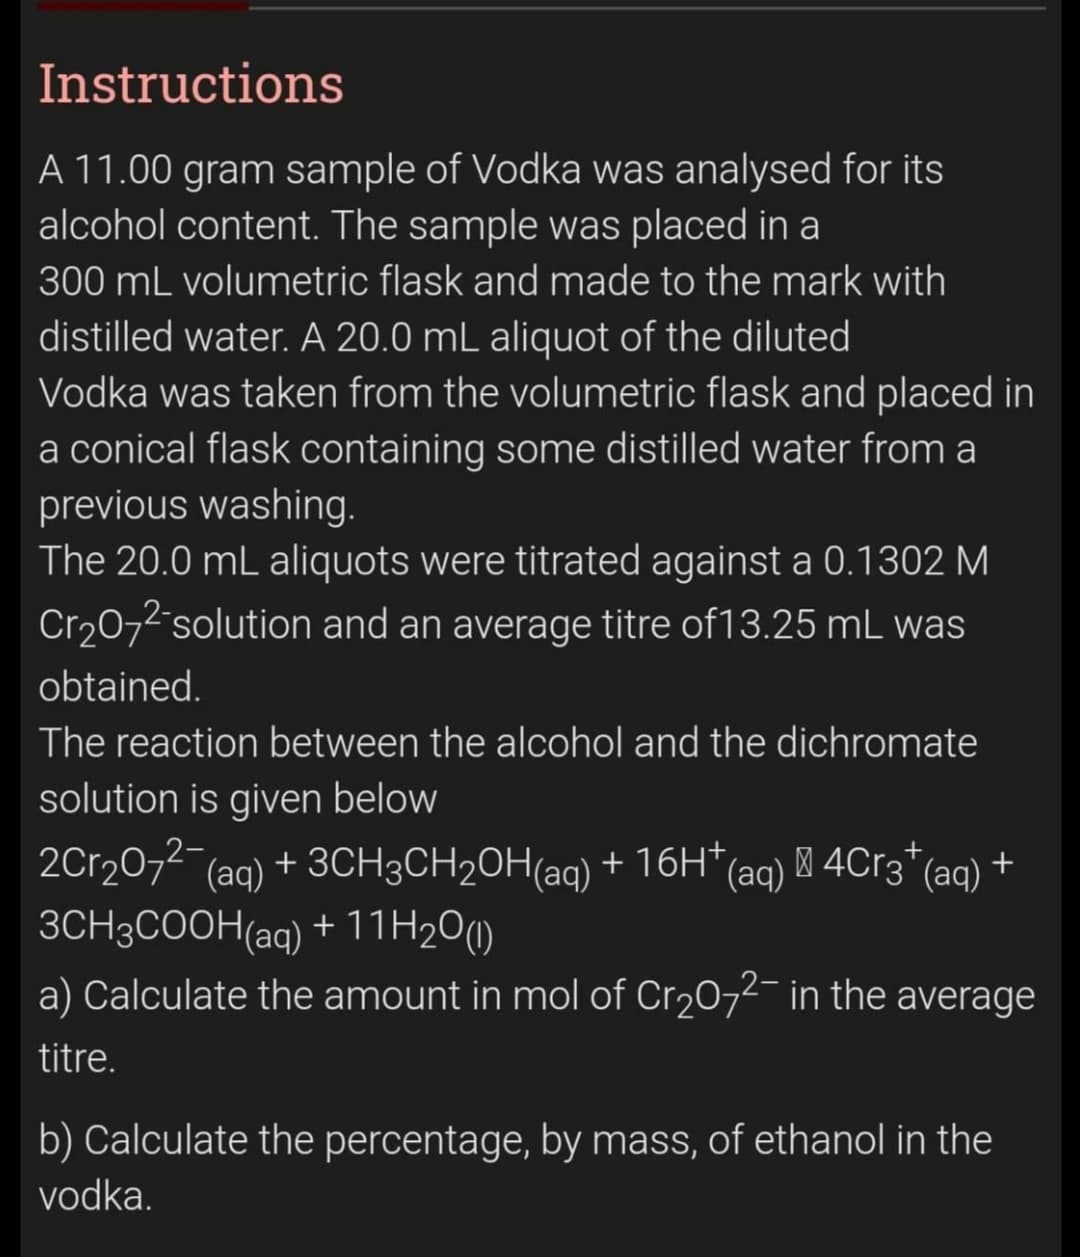 Instructions
A 11.00 gram sample of Vodka was analysed for
alcohol content. The sample was placed in a
300 mL volumetric flask and made to the mark with
distilled water. A 20.0 mL aliquot of the diluted
Vodka was taken from the volumetric flask and placed in
a conical flask containing some distilled water from a
previous washing.
The 20.0 mL aliquots were titrated against a 0.1302 M
Cr2072 solution and an average titre of13.25 mL was
obtained.
The reaction between the alcohol and the dichromate
solution is given below
2Cr207- (ag) + 3CH3CH20H(ag) + 16H*(
3CH3COOH(aq) + 11H2O(1)
a) Calculate the amount in mol of Cr2072- in the average
(aq) M 4C13"(aq) +
titre.
b) Calculate the percentage, by mass, of ethanol in the
vodka.
